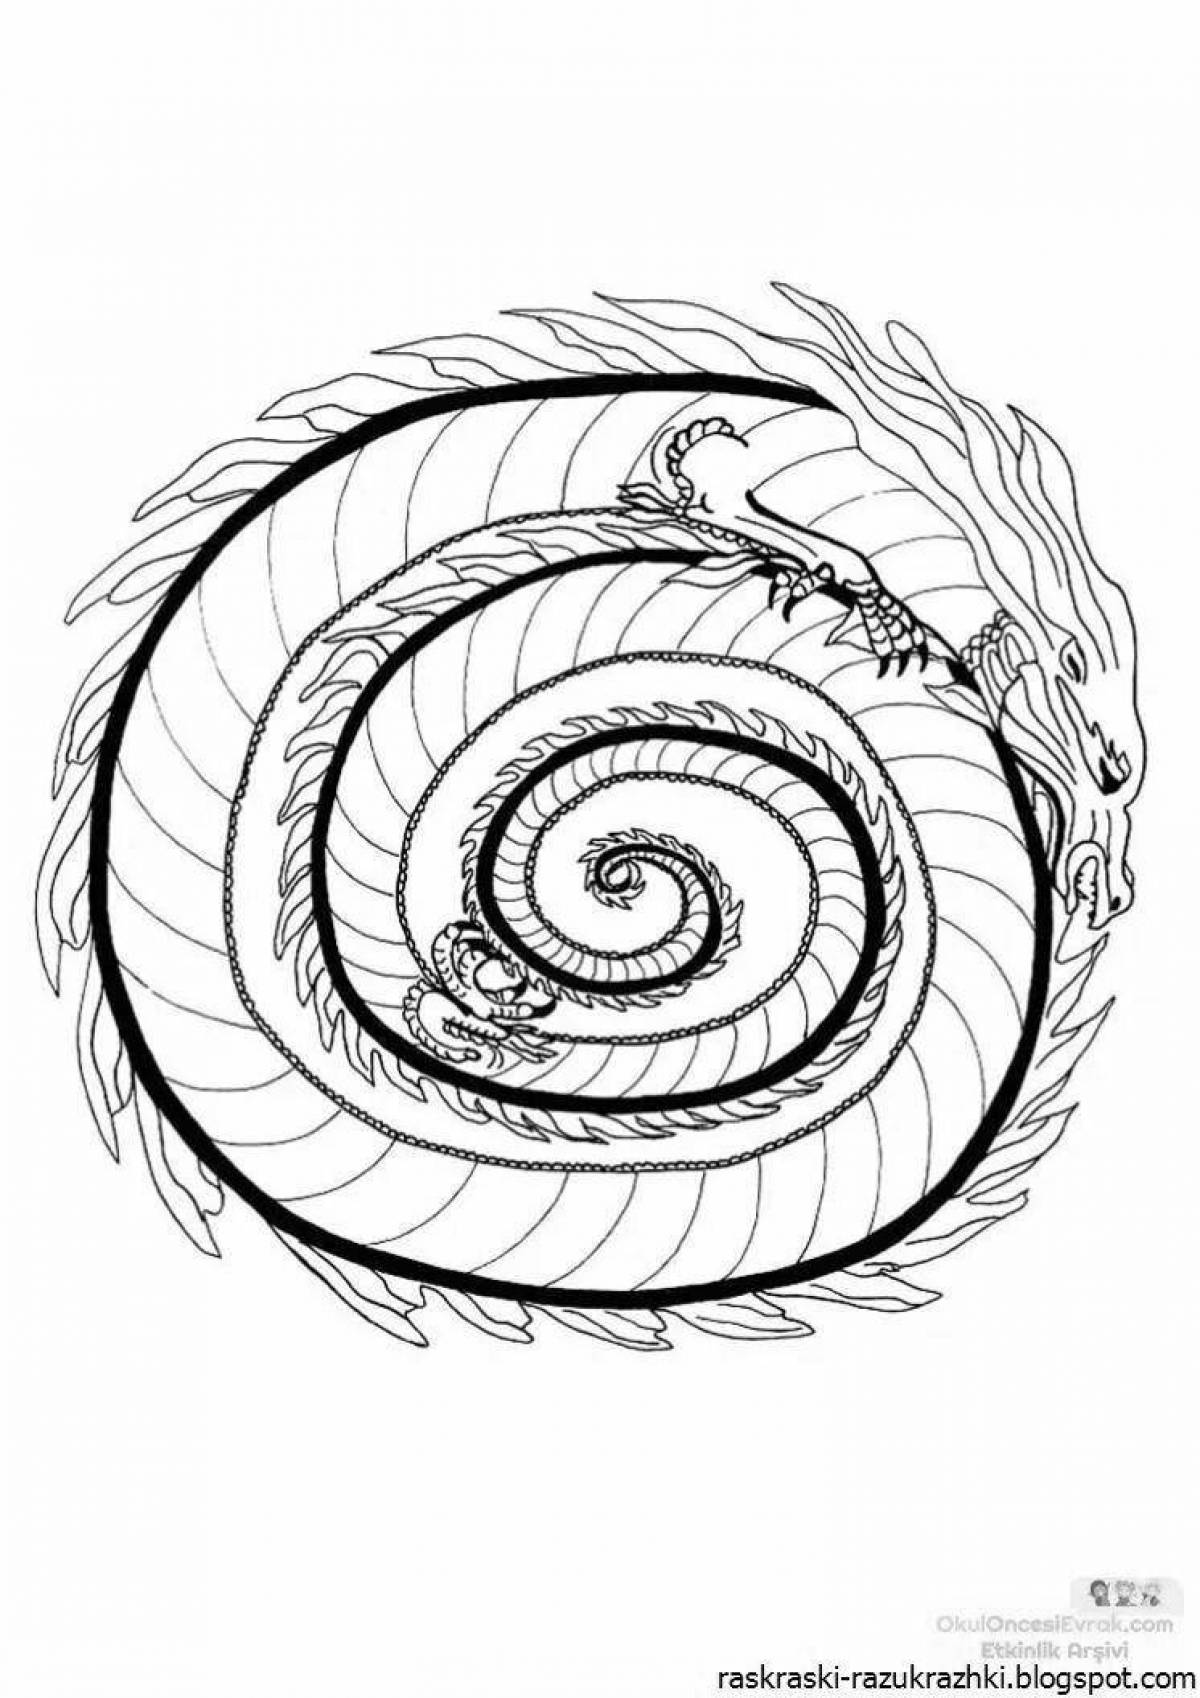 Creating a spiral coloring page live